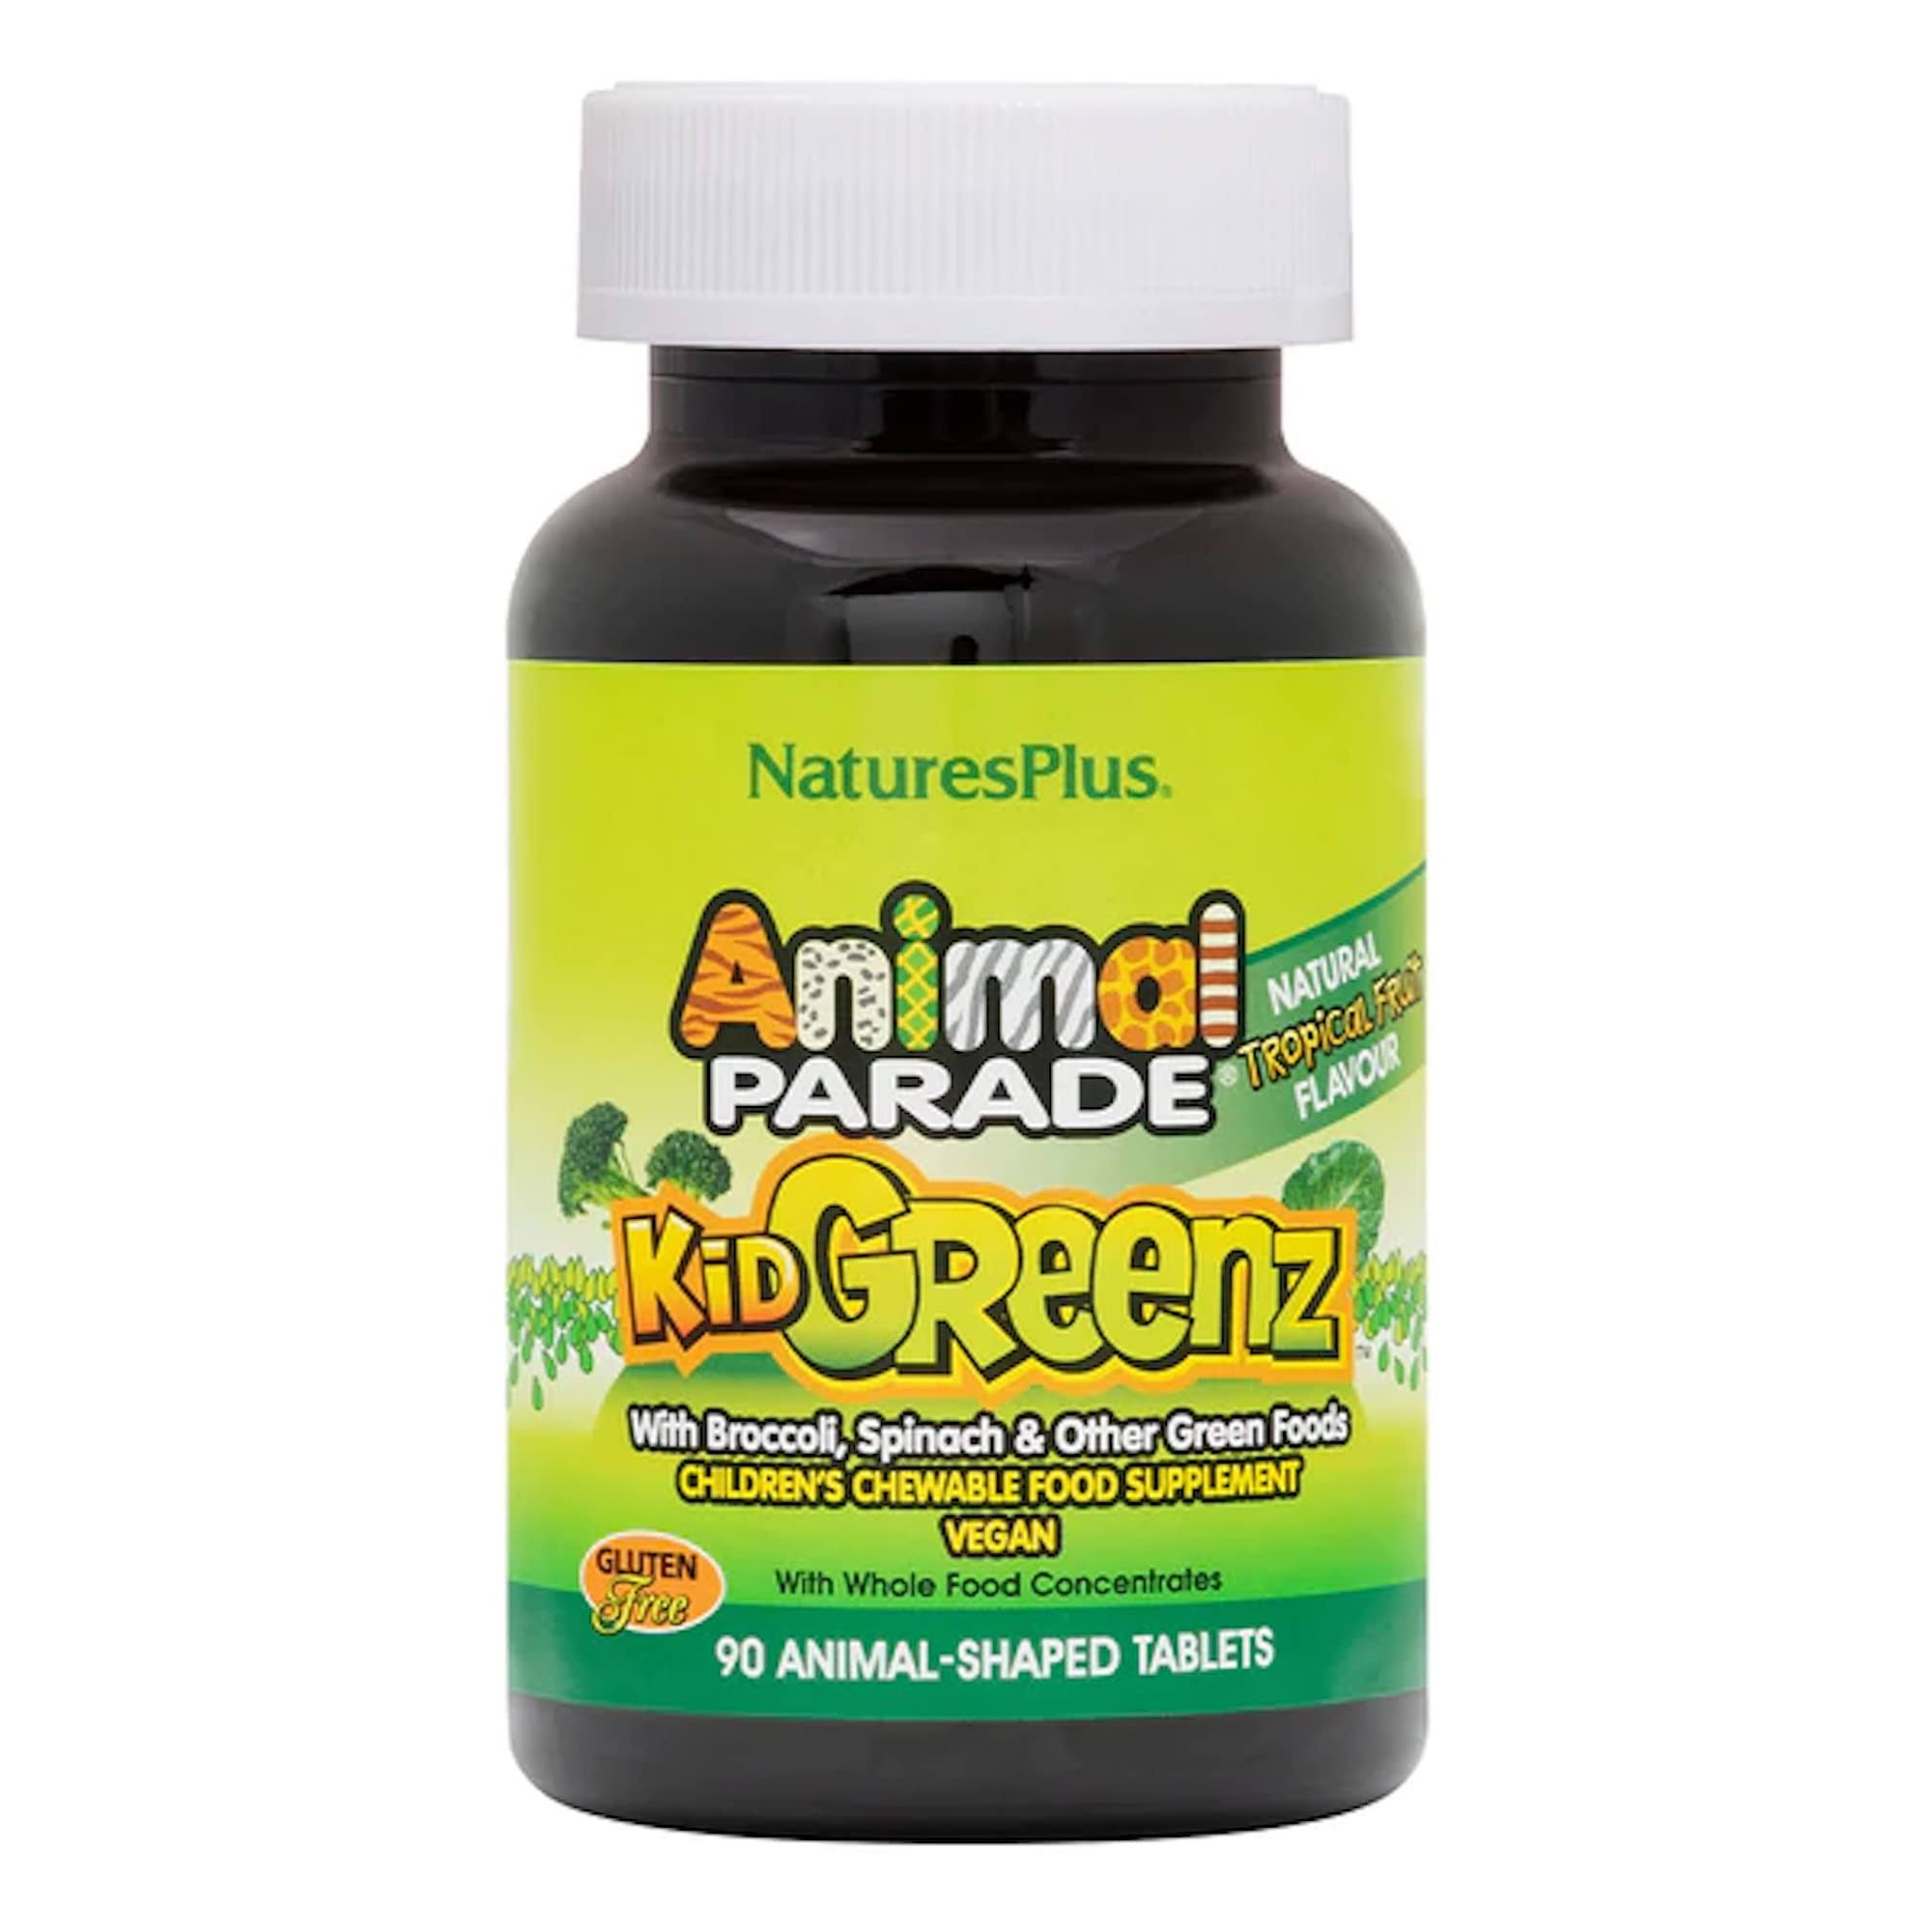 Nature's Plus Animal Parade Kid Greenz Chewable Dietary Supplement - Tropical Fruit, x90